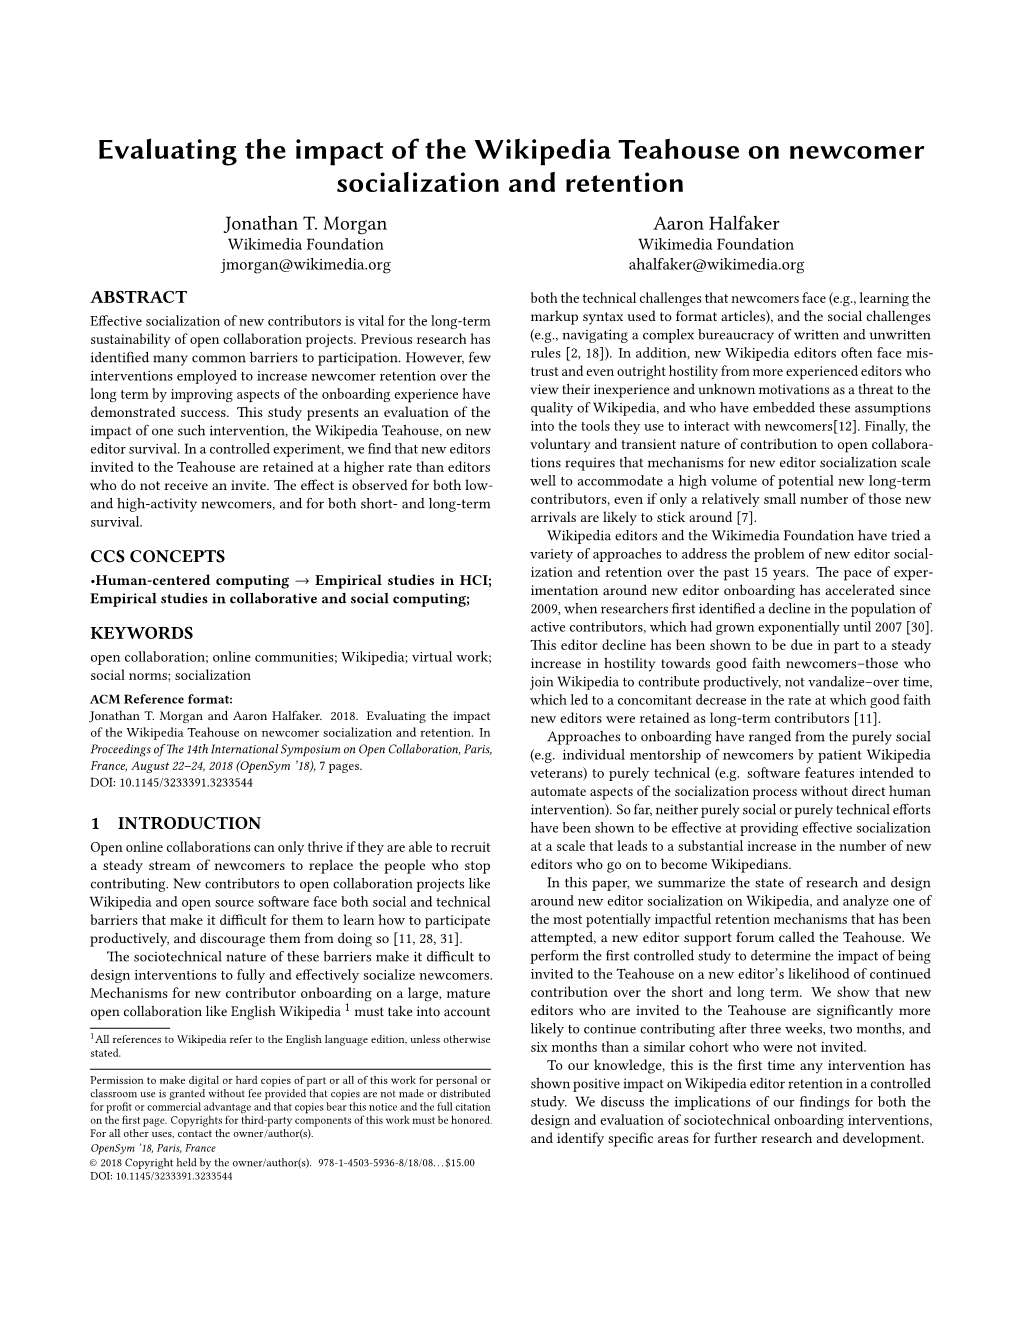 Evaluating the Impact of the Wikipedia Teahouse on Newcomer Socialization and Retention Jonathan T